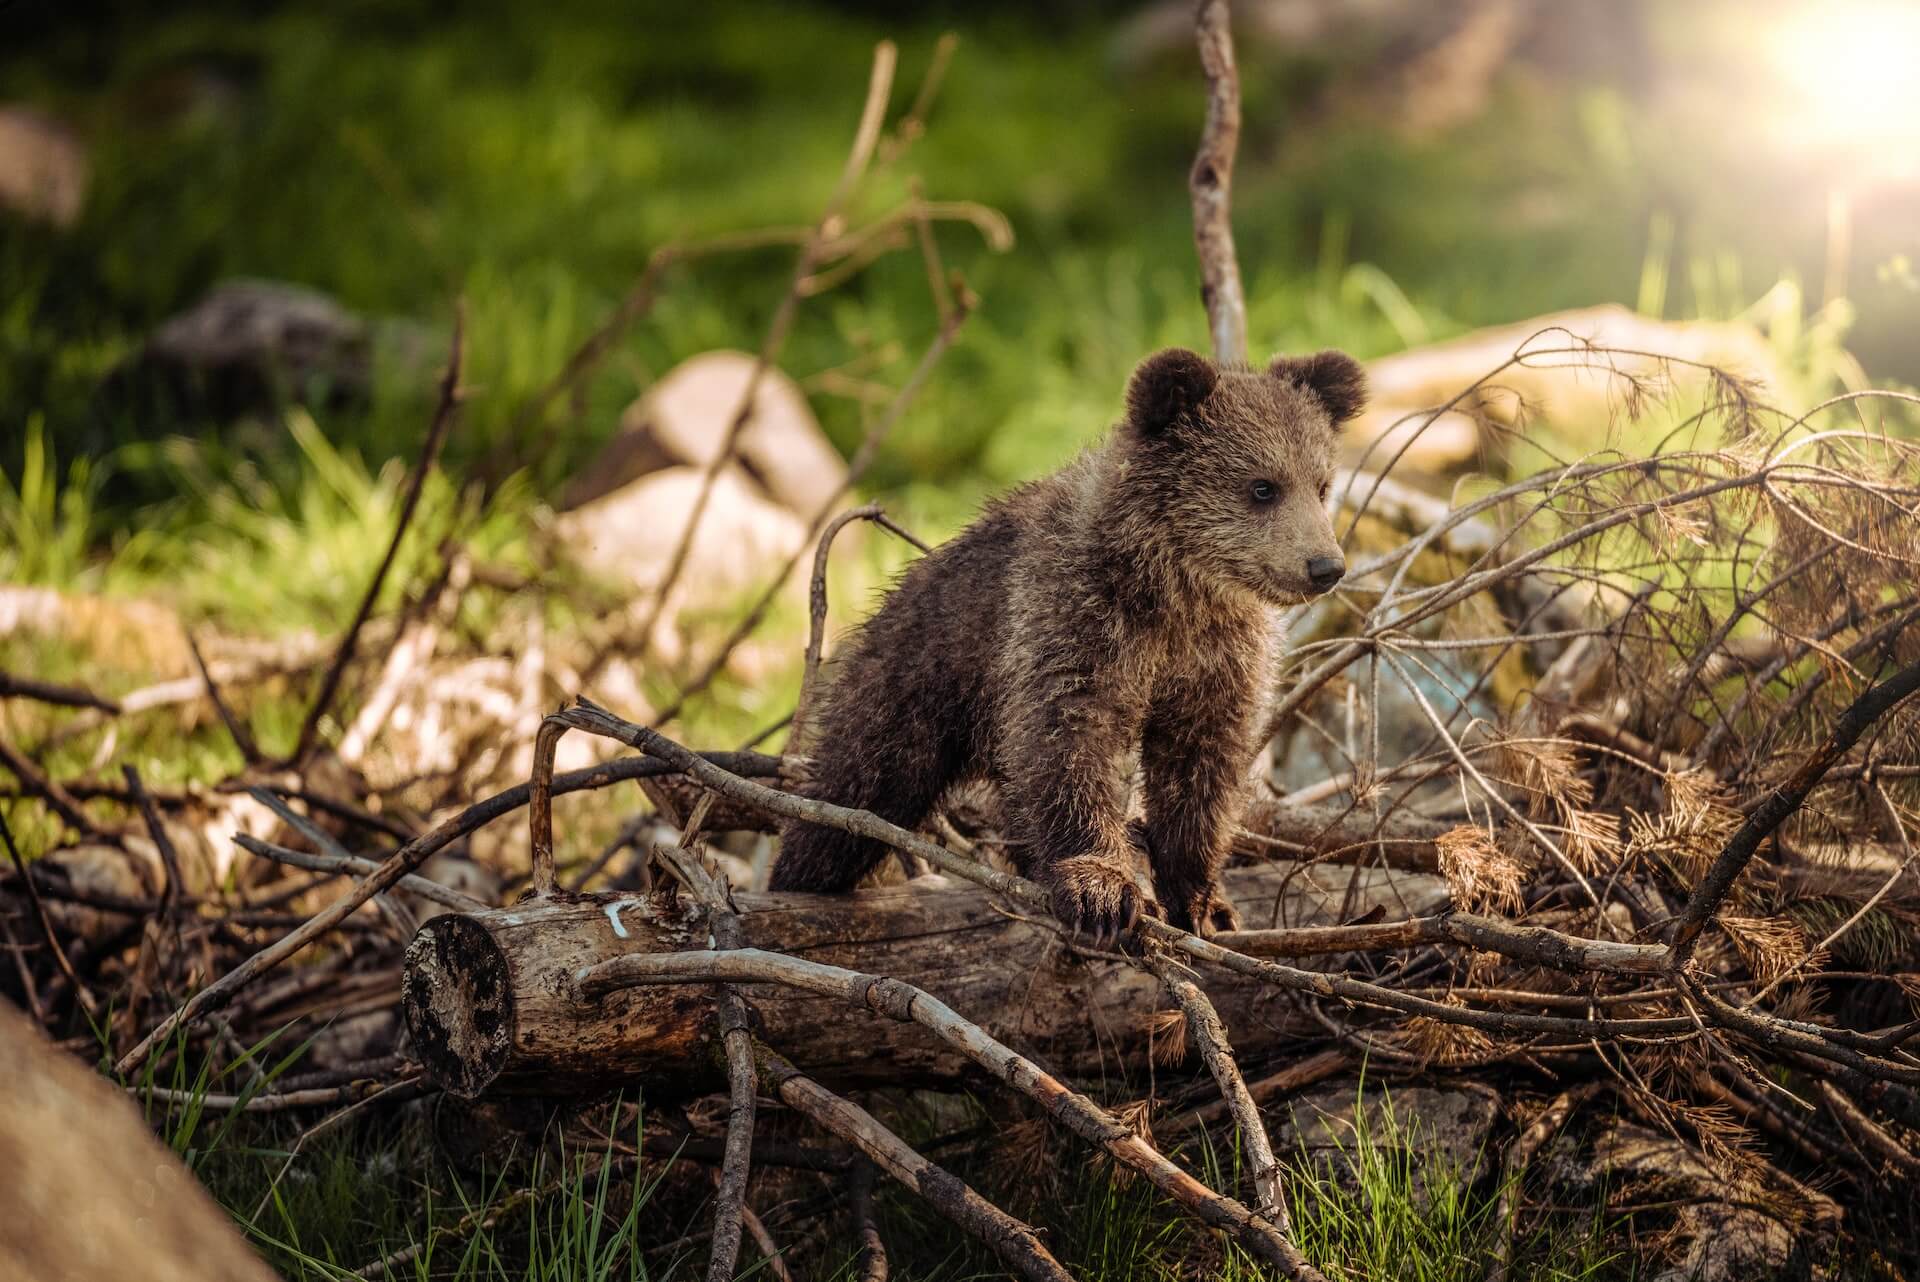 An image of a cute baby brown bear on top of a log and pile of sticks, from Janko Ferlic on Unsplash.